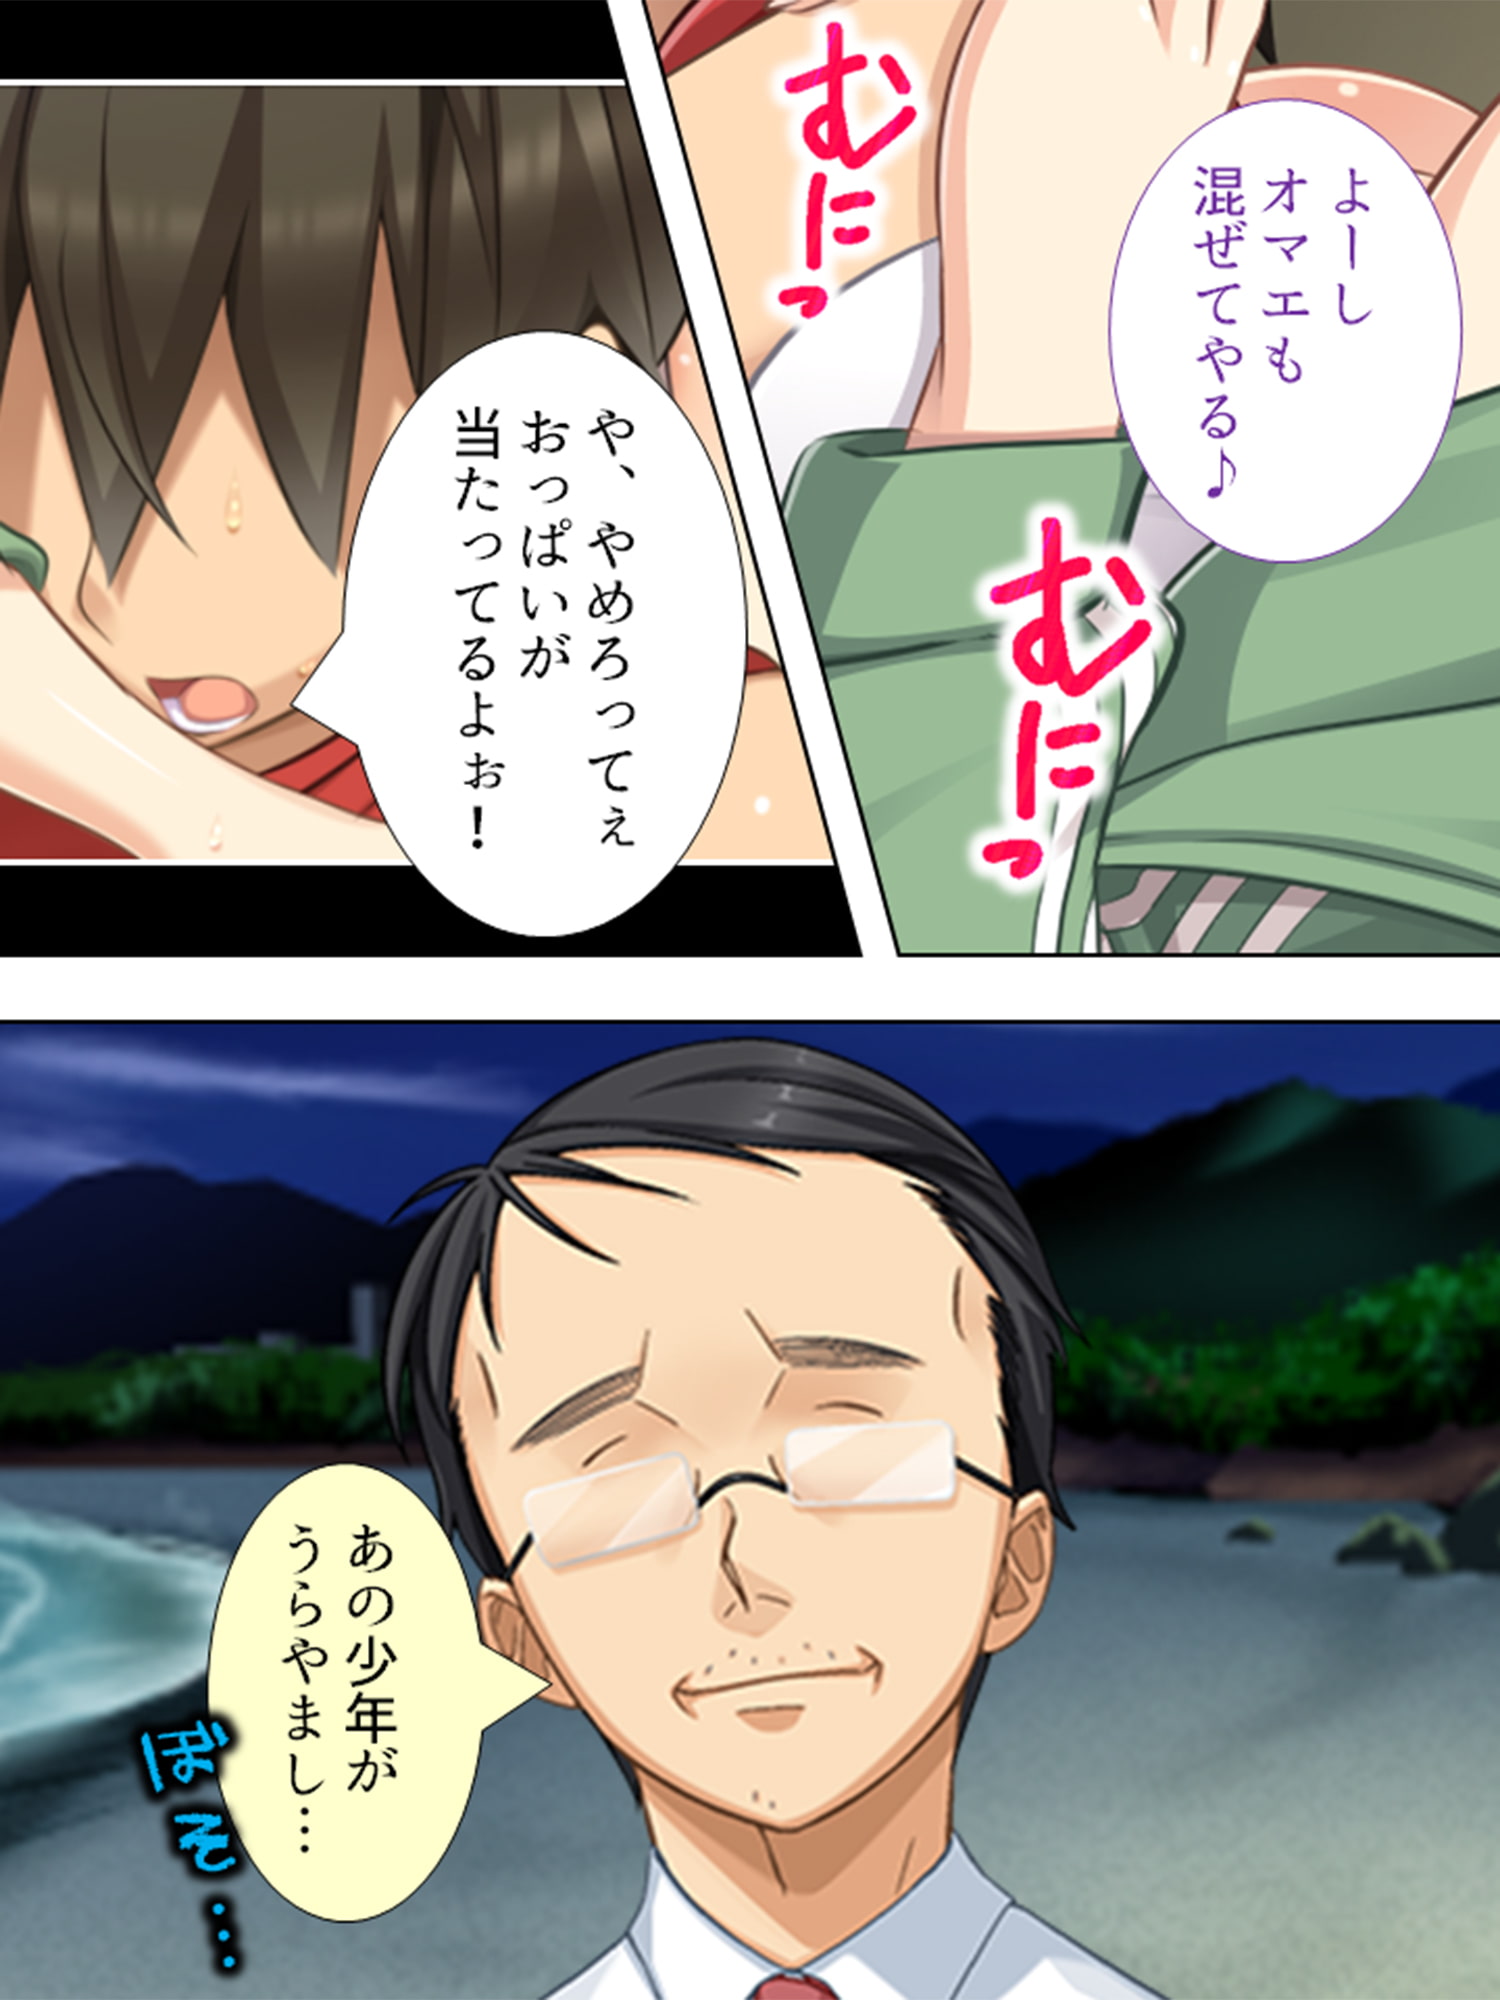 I'm Tired of Life so I Went Around Violating Girls at a Hot Spring - Part 1